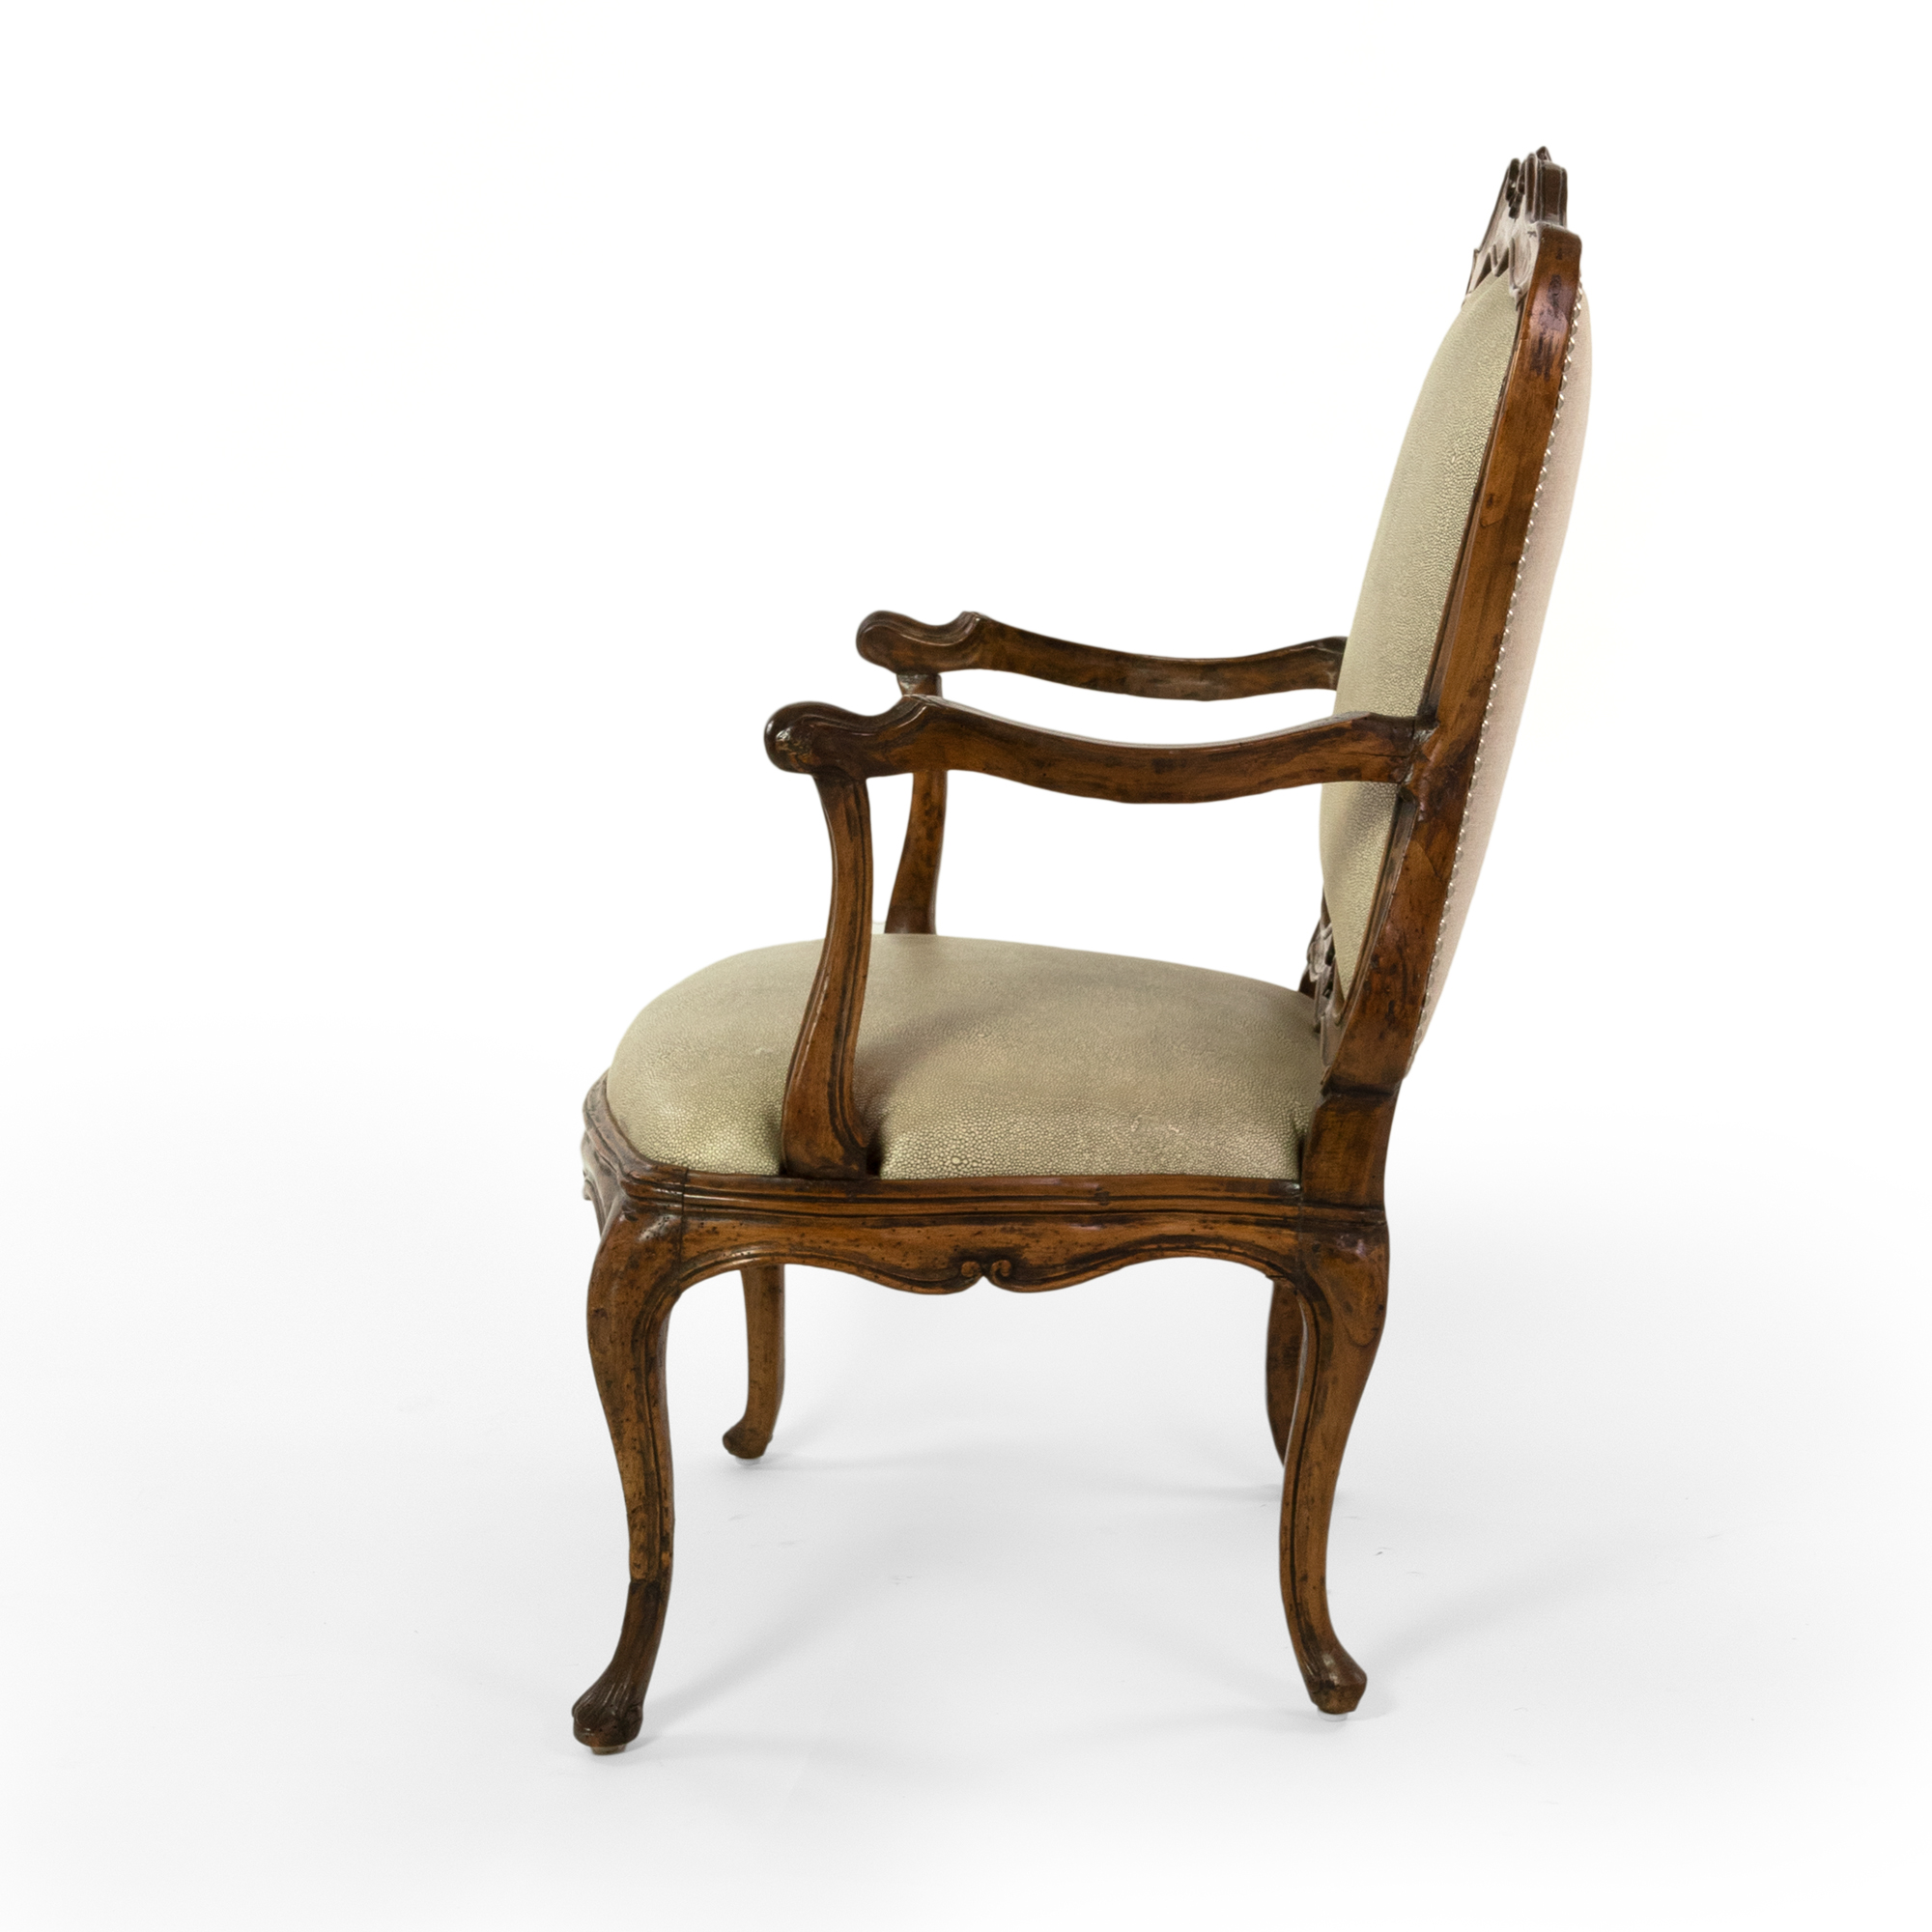 Sold at Auction: Pair of Louis XVI chairs in carved walnut, with me…